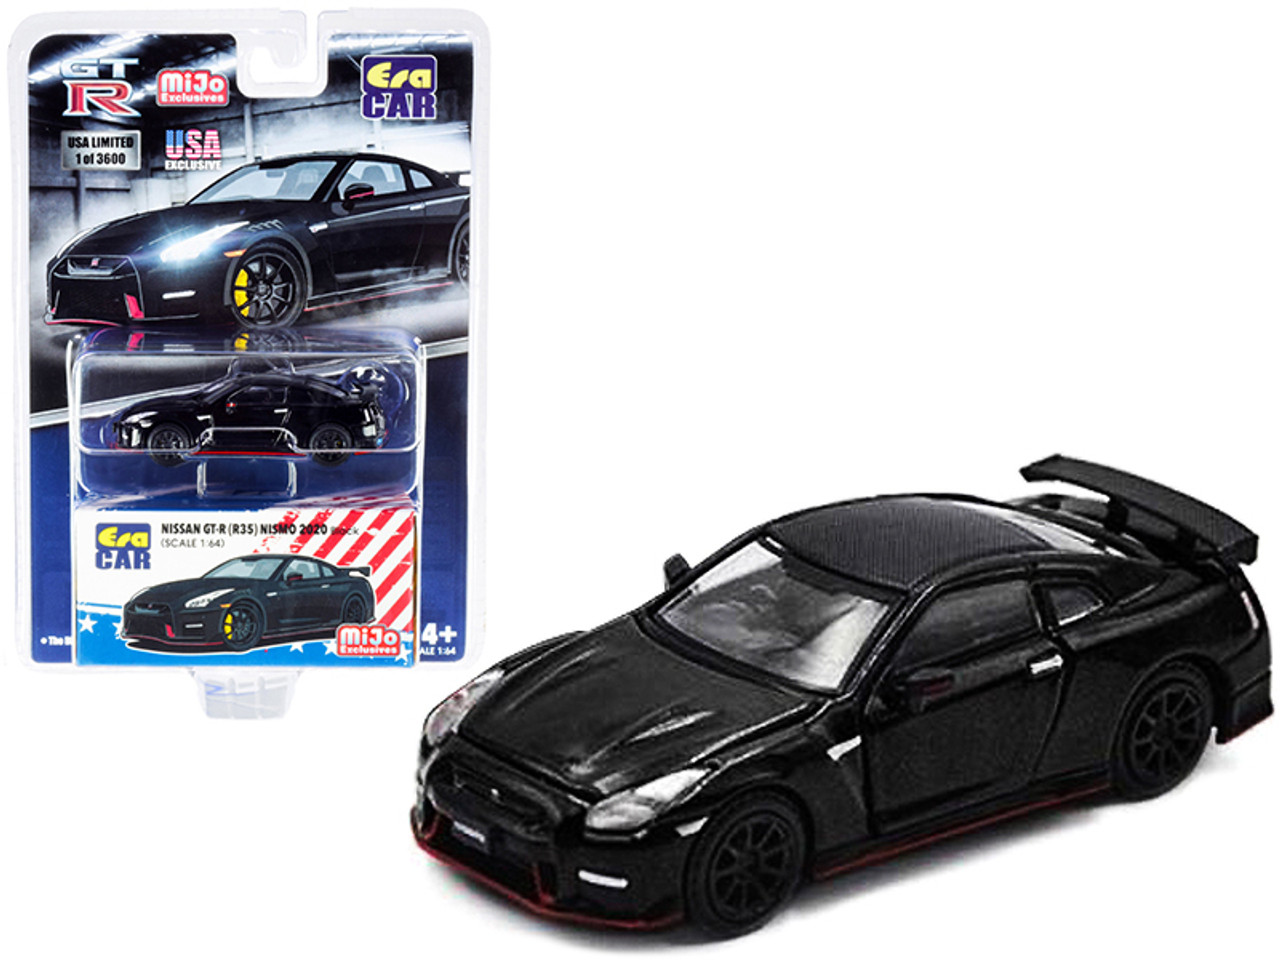 2020 Nissan GT-R (R35) Nismo RHD (Right Hand Drive) Black with Carbon Top Limited Edition to 3600 pieces 1/64 Diecast Model Car by Era Car